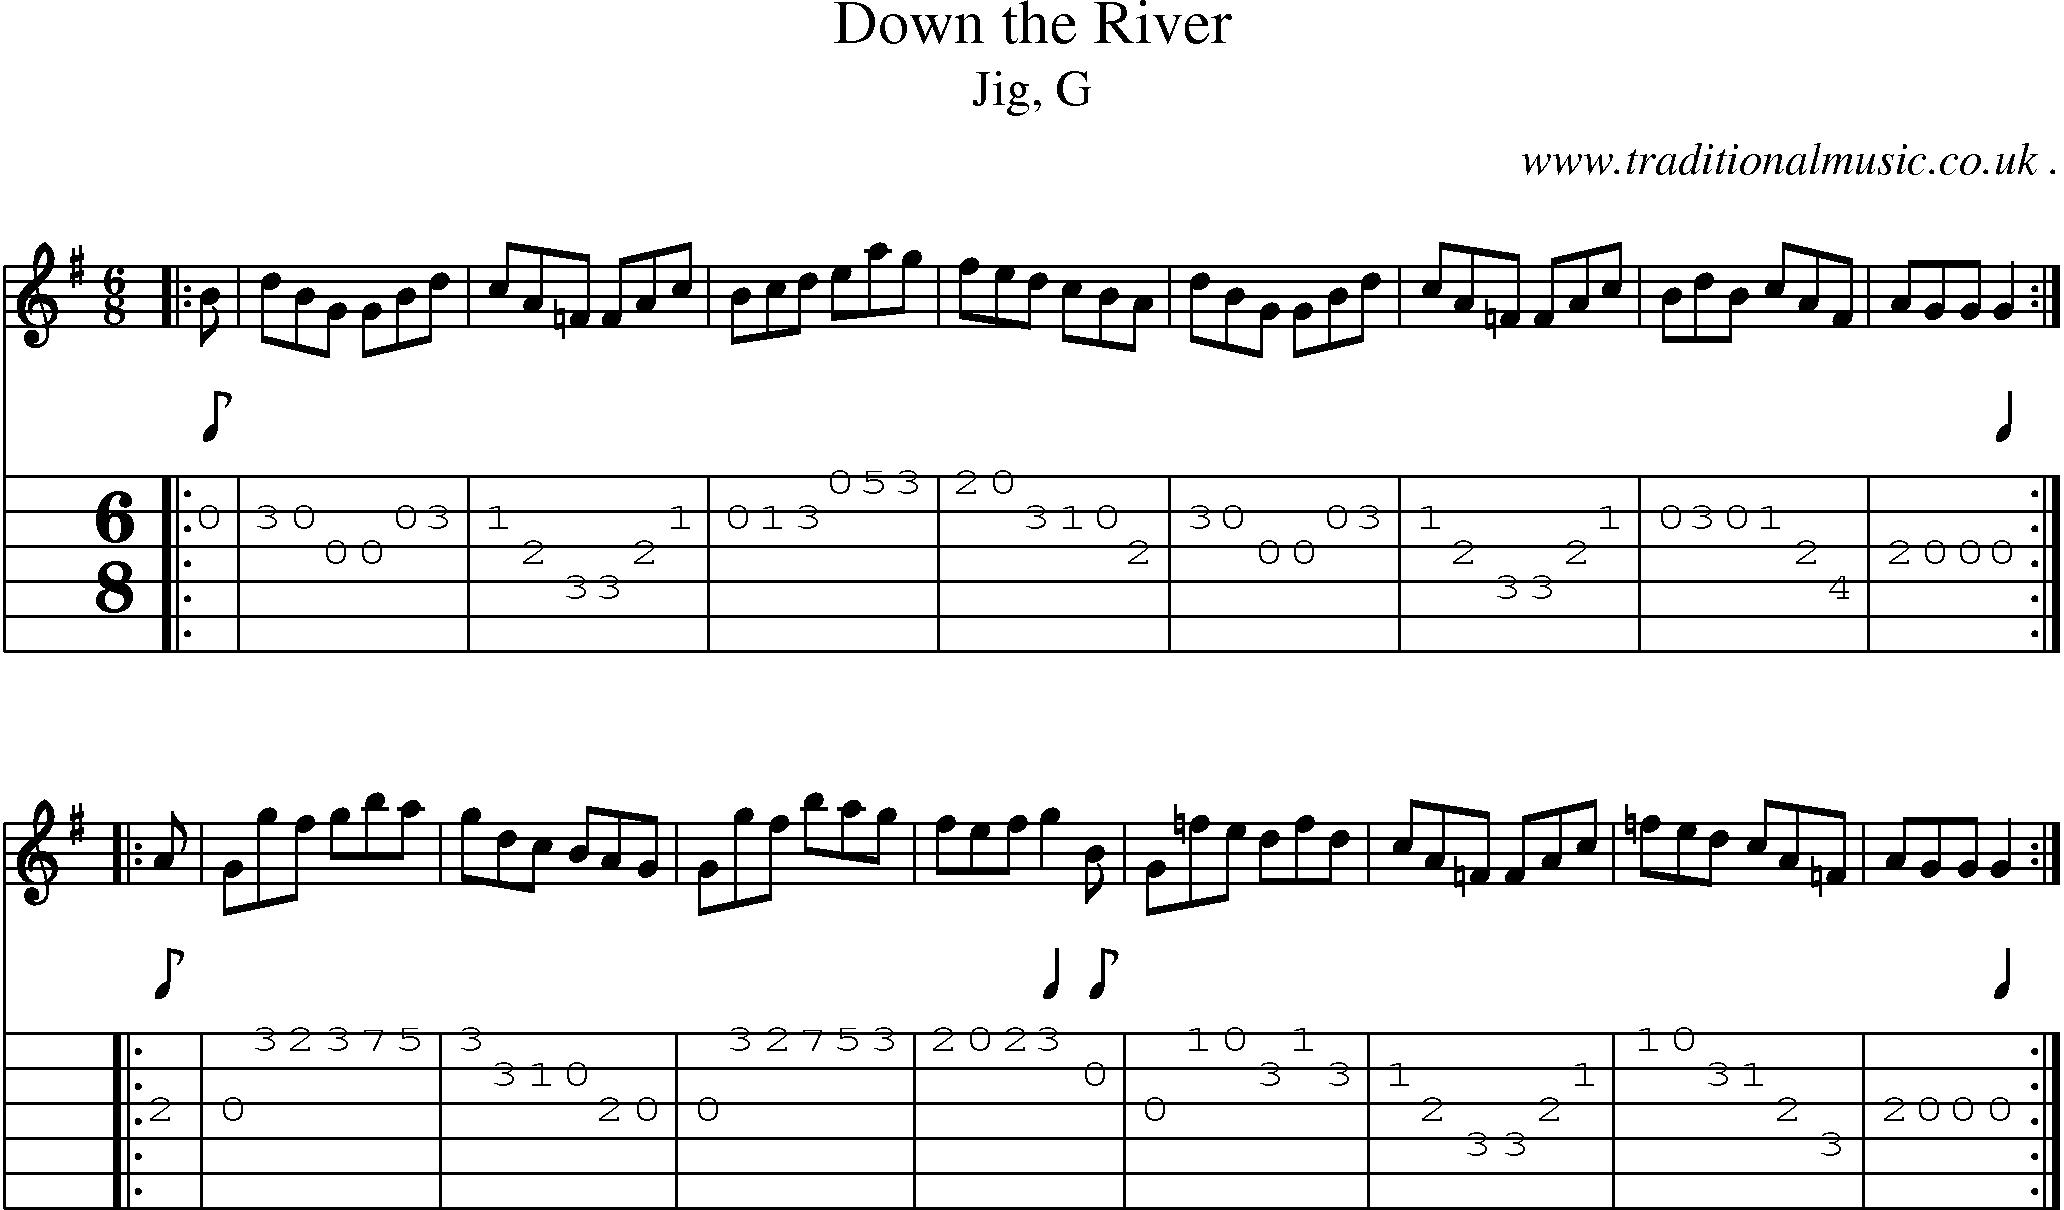 Sheet-music  score, Chords and Guitar Tabs for Down The River